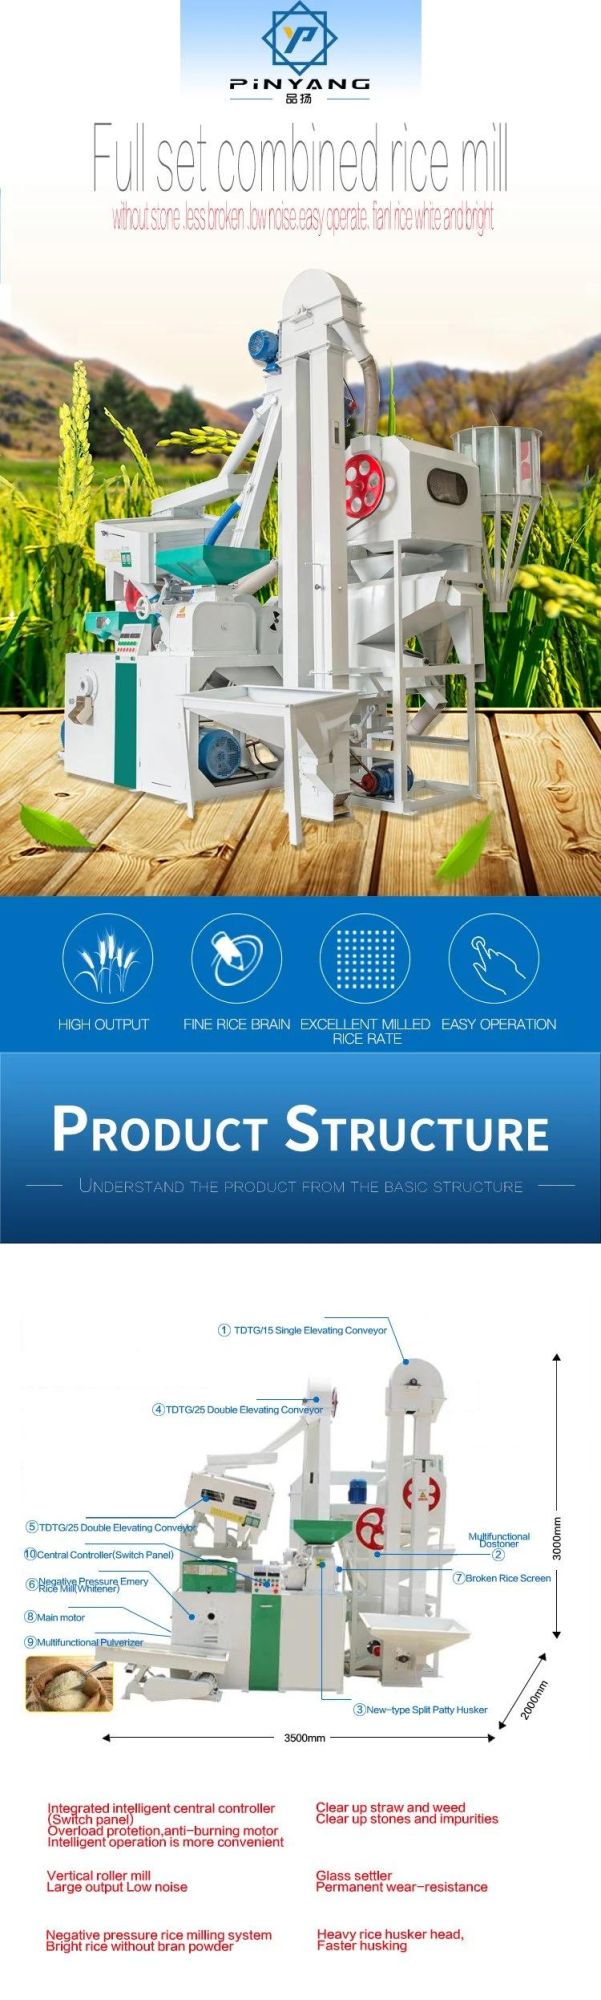 15-20t/Day Combined Full Set Rice Mill